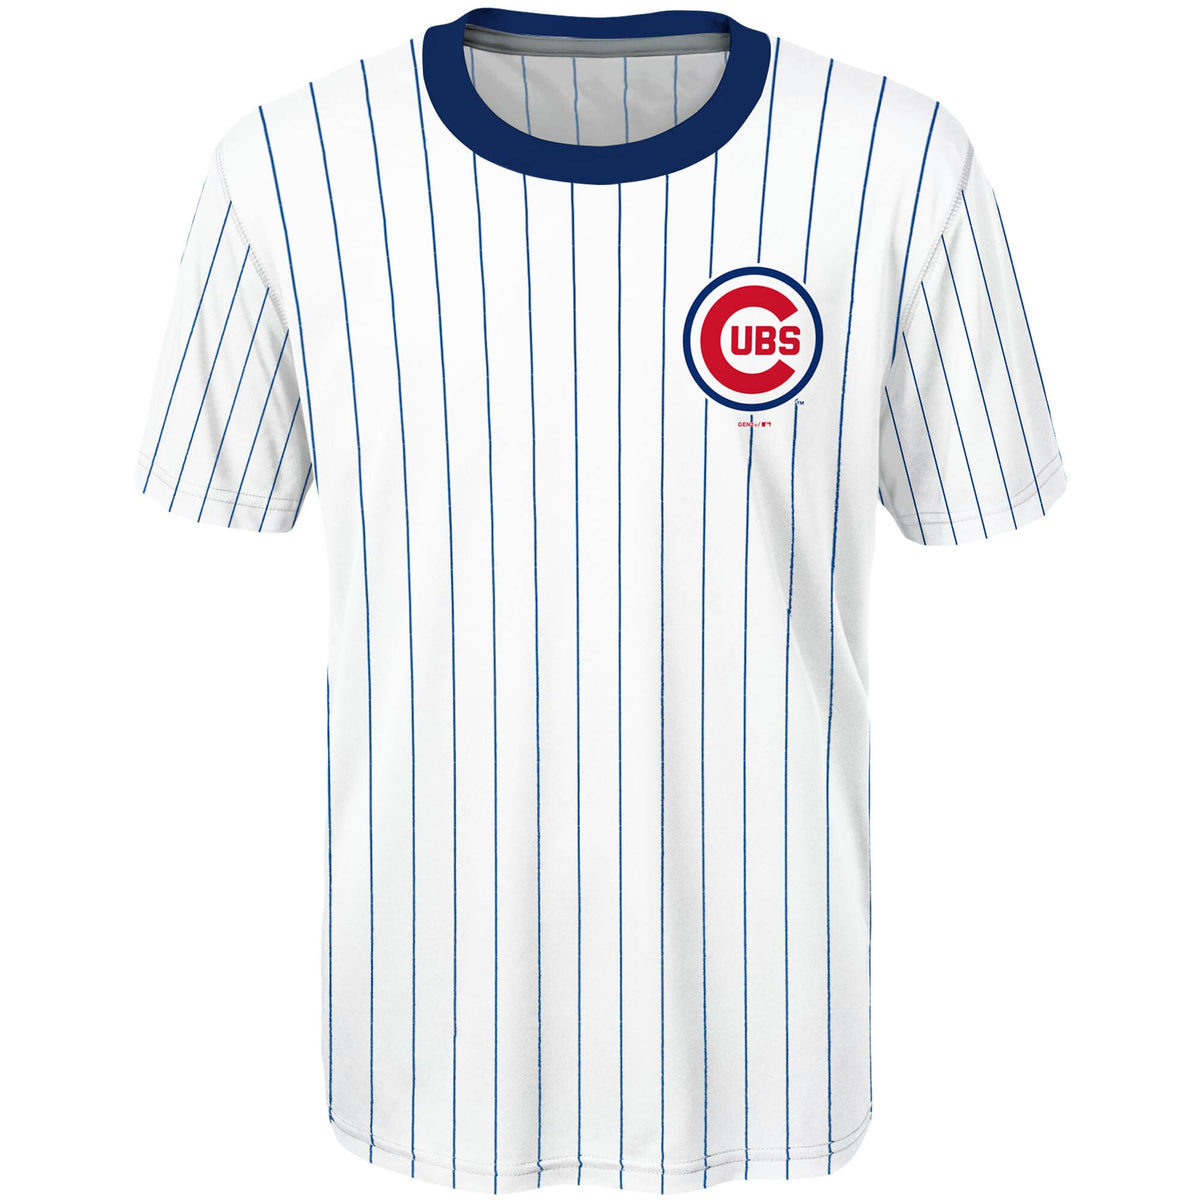 Majestic Chicago Cubs MLB Bryant 17 White Short Sleeve Jersey Adult Size XL  NEW